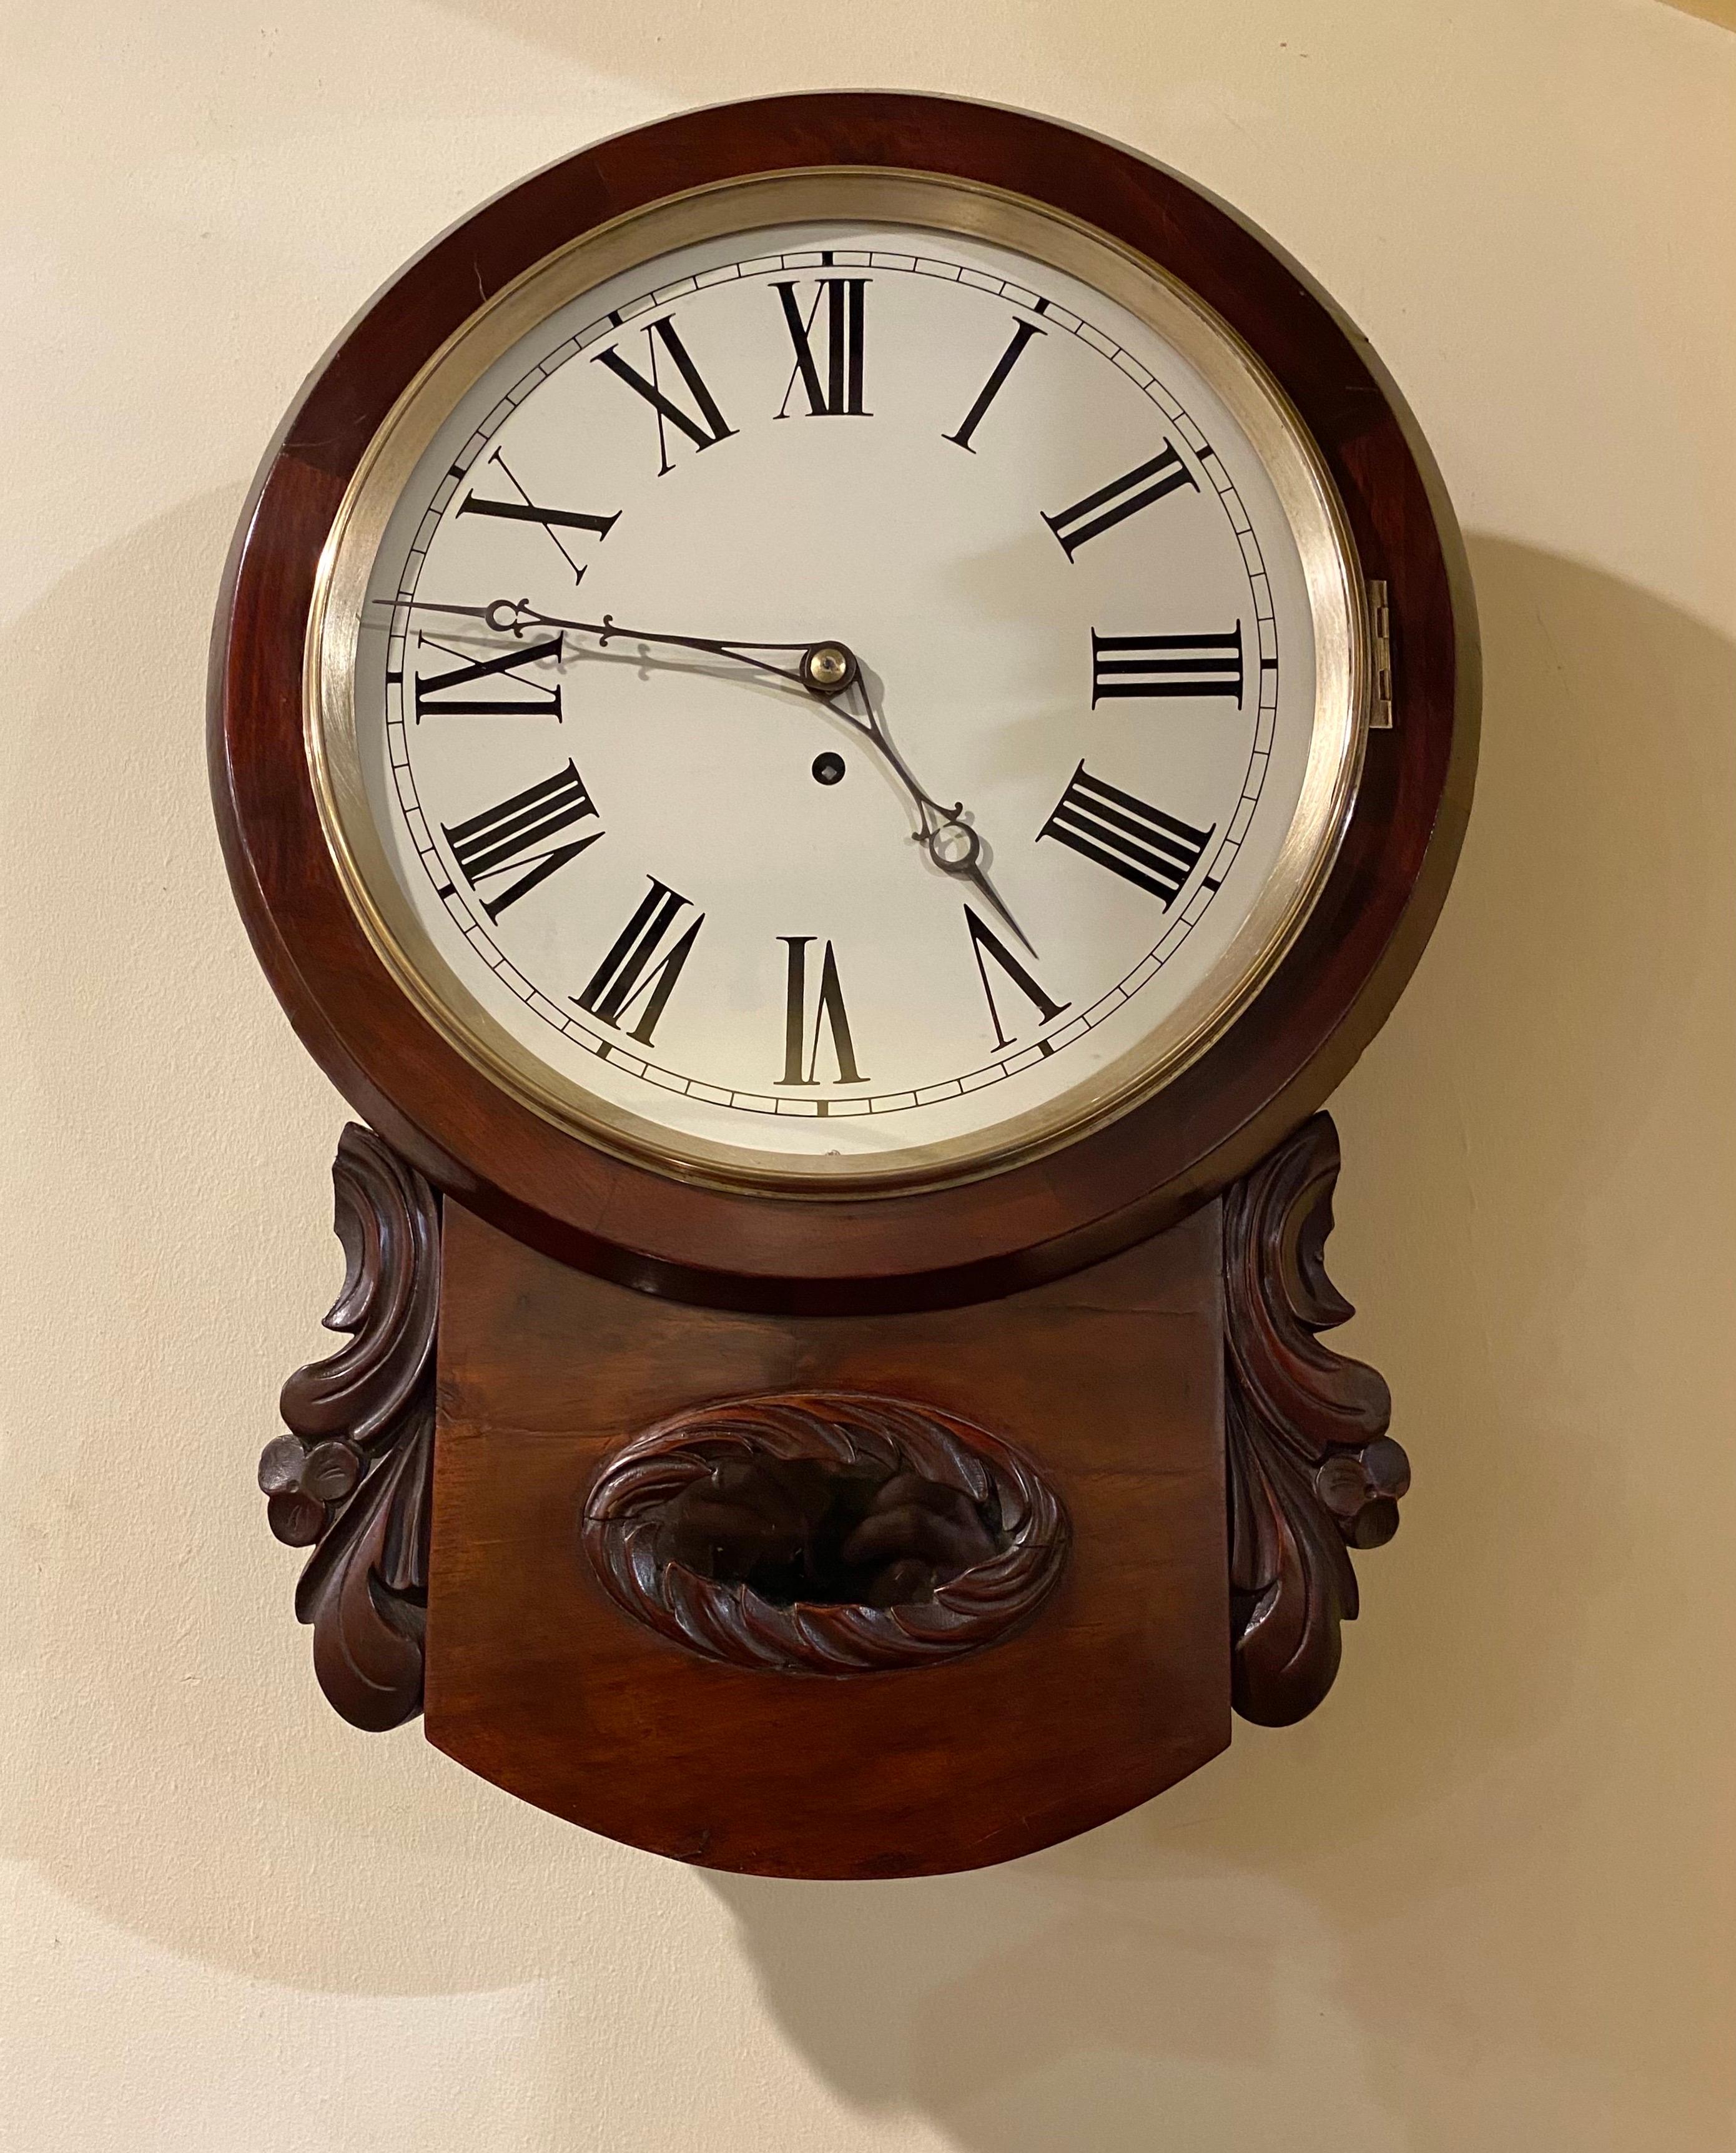 Antique Regency drop dial wall Fusee clock in lovely condition.
Mahogany case, glass door with brass bezel. Painted enamel dial. Drop dial with shaped glazed window, fusee movement. Original brass pendulum. Viewing Door that opens to the bottom &